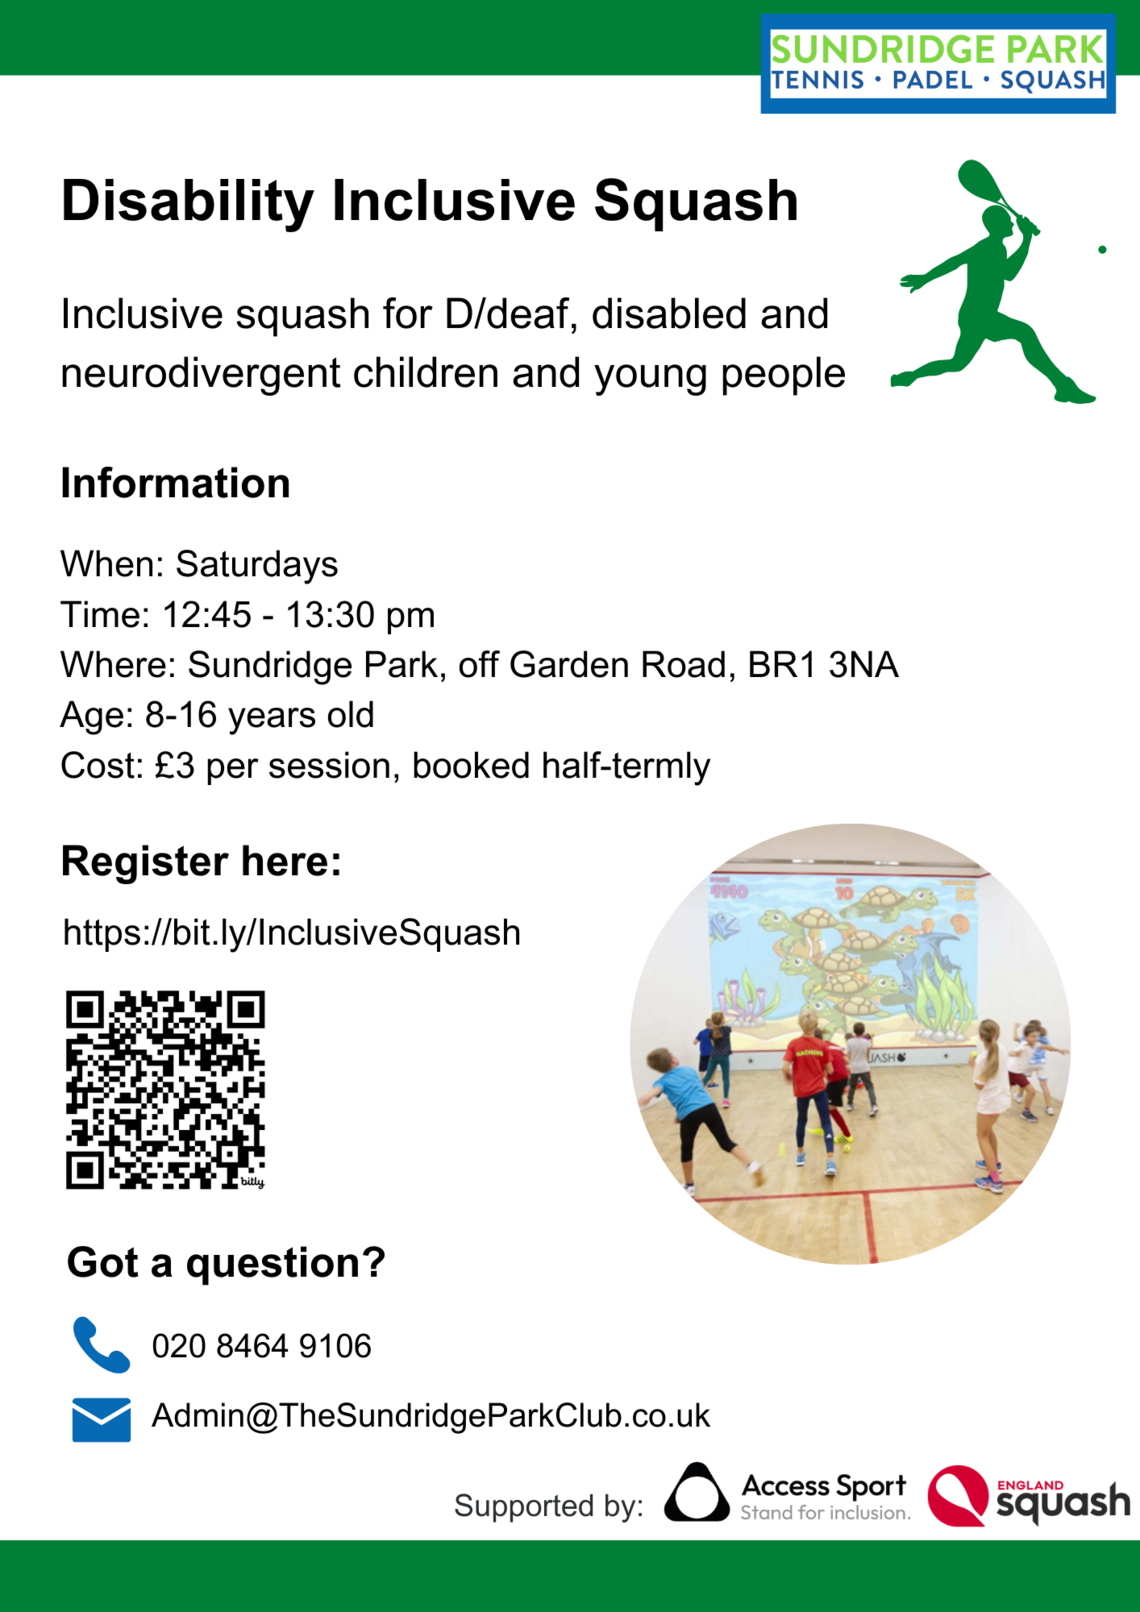 Disability Inclusive Squash flyer (text on webpage)